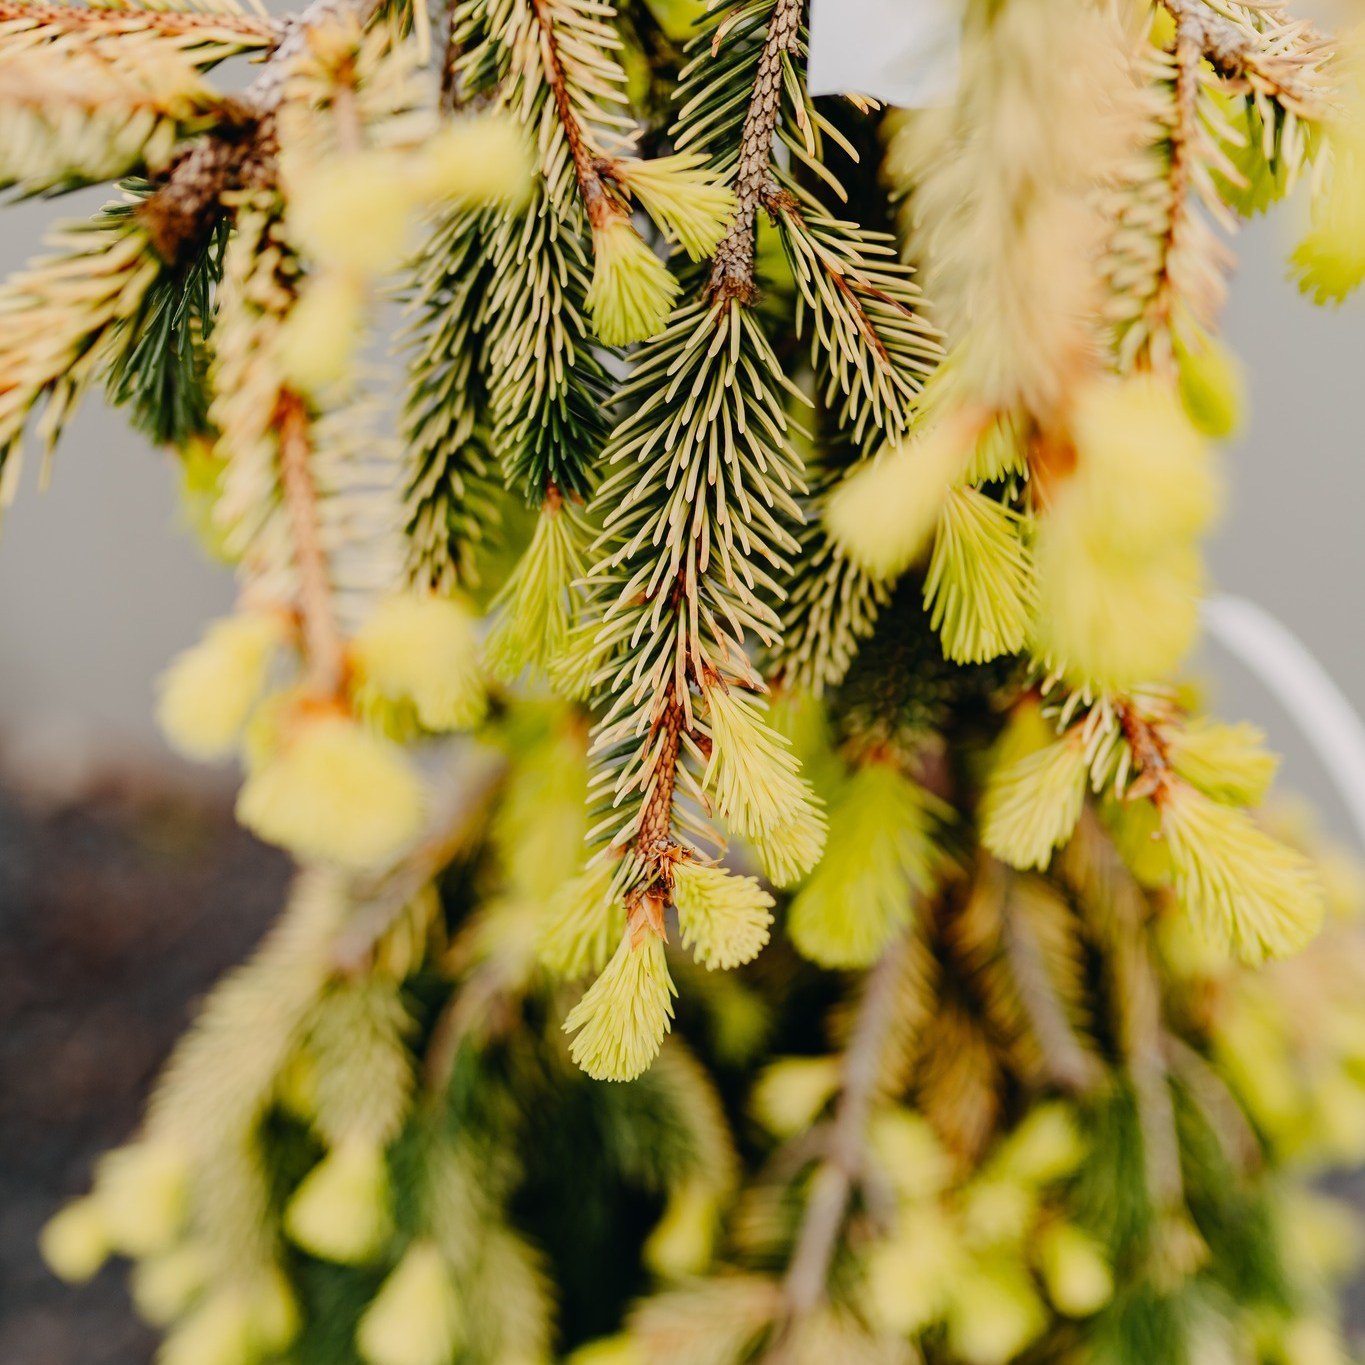 We have tons of NEW Evergreen shrubs + trees!!😍

Stop in tomorrow and check out the fun &amp; funky varieties we have! You can see some of them have new growth and it's so cool to see in person!

#downtoearth #eauclaire #evergreenshrubs #trees #new 